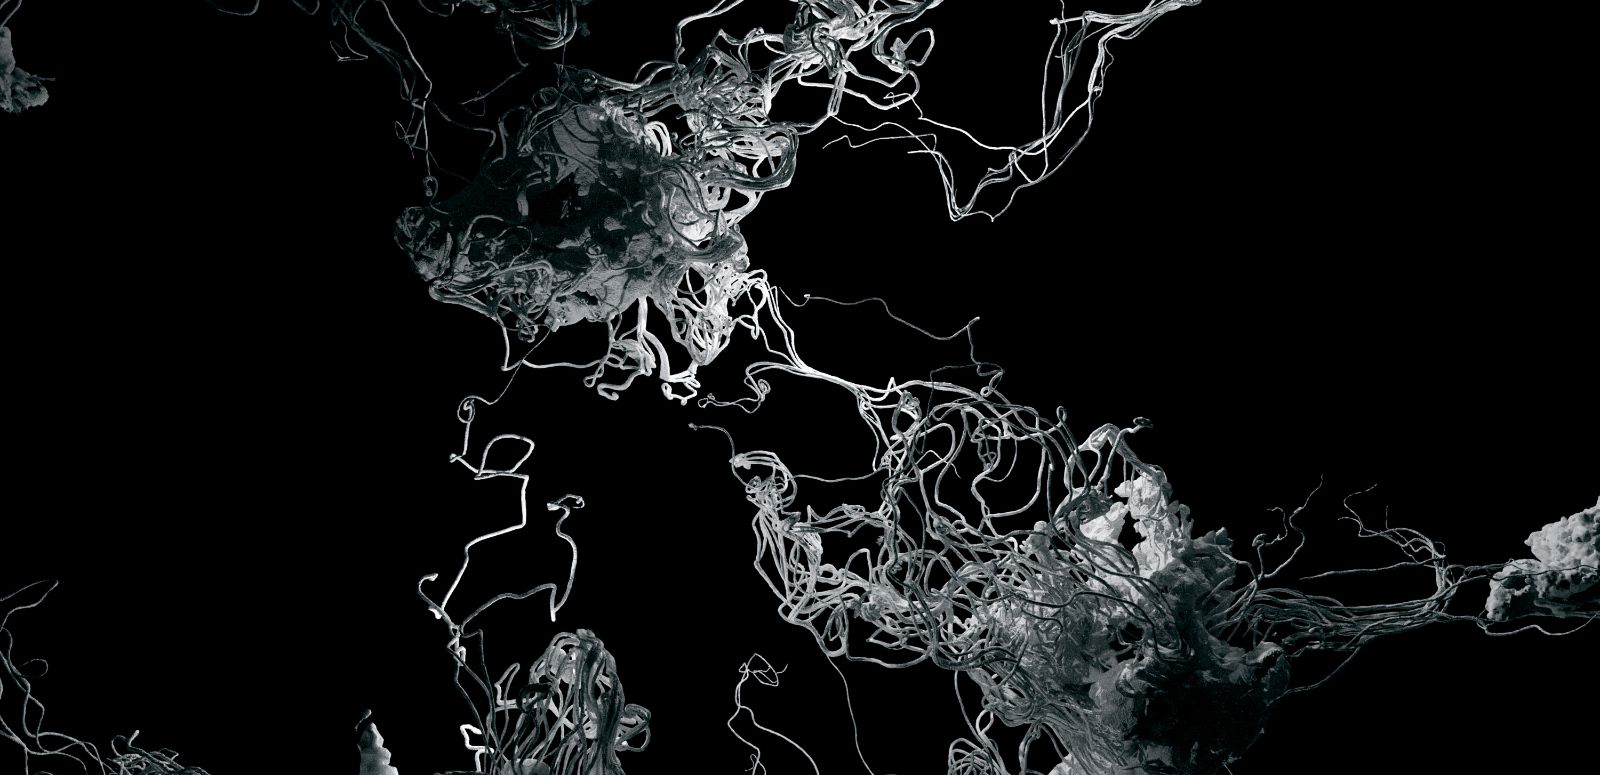 Clusters of threads move across the image area, emerging from lump-like formations.